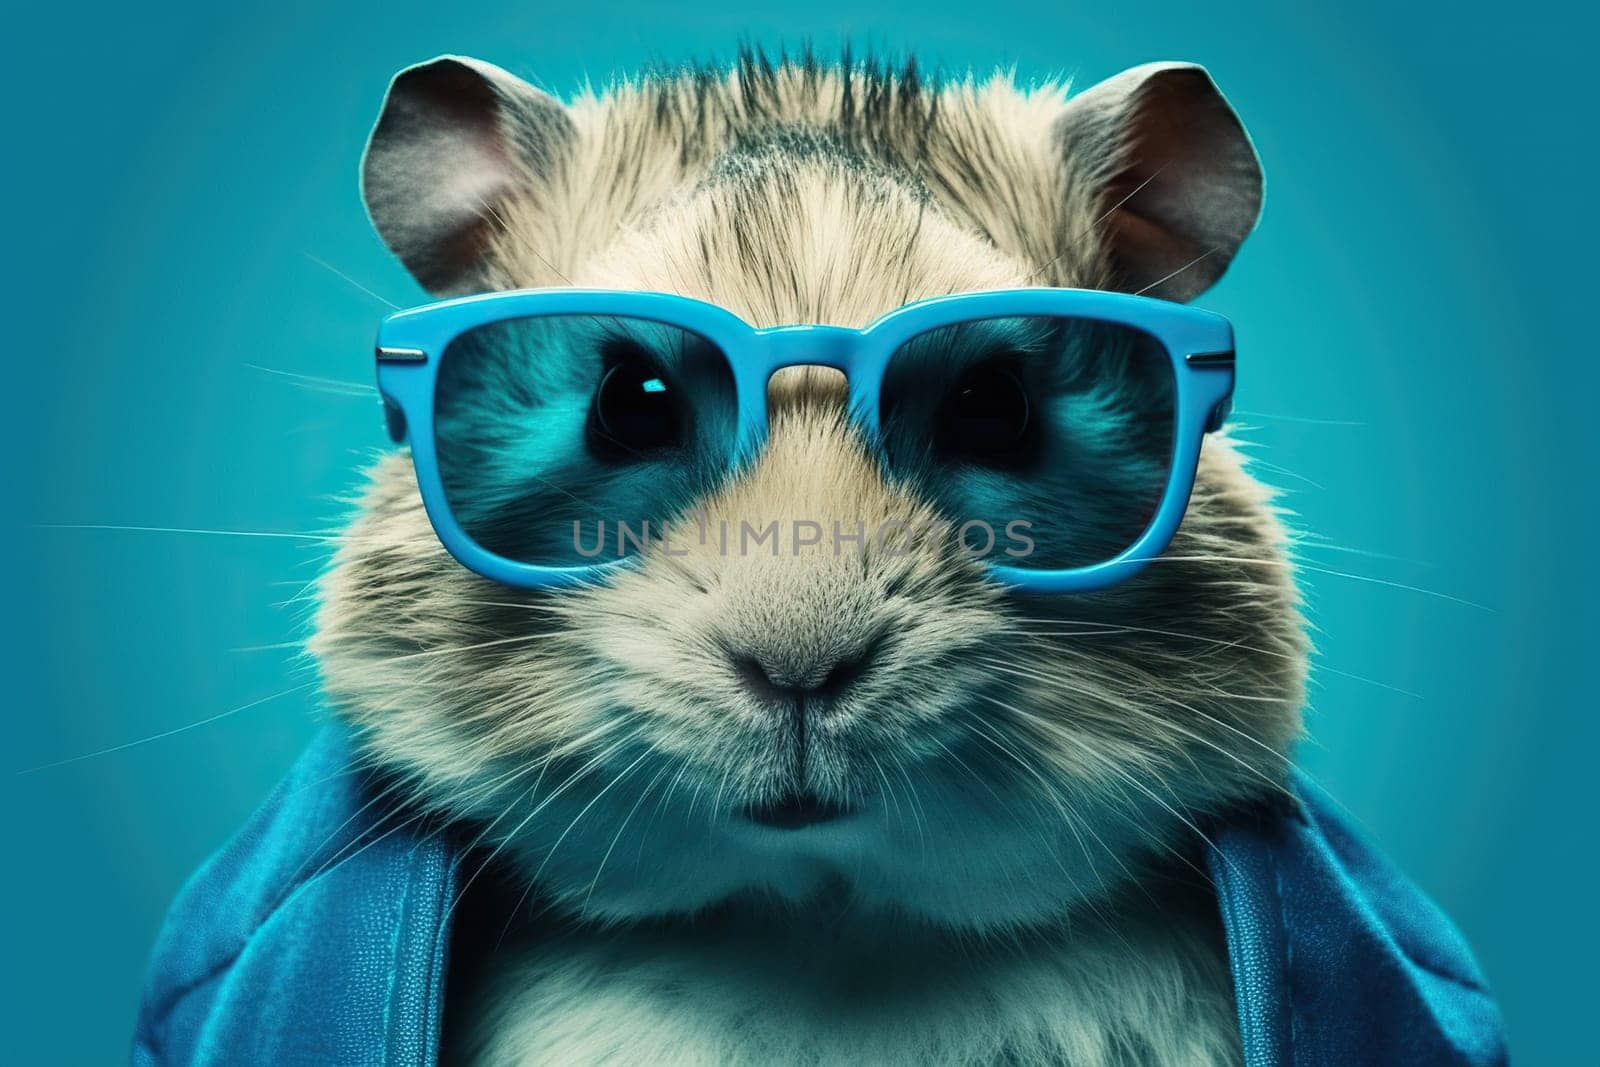 Humorous And Fashionable Hamster, Resembling A Singer, Seen In Mirrored Sunglasses Against A Blue Background